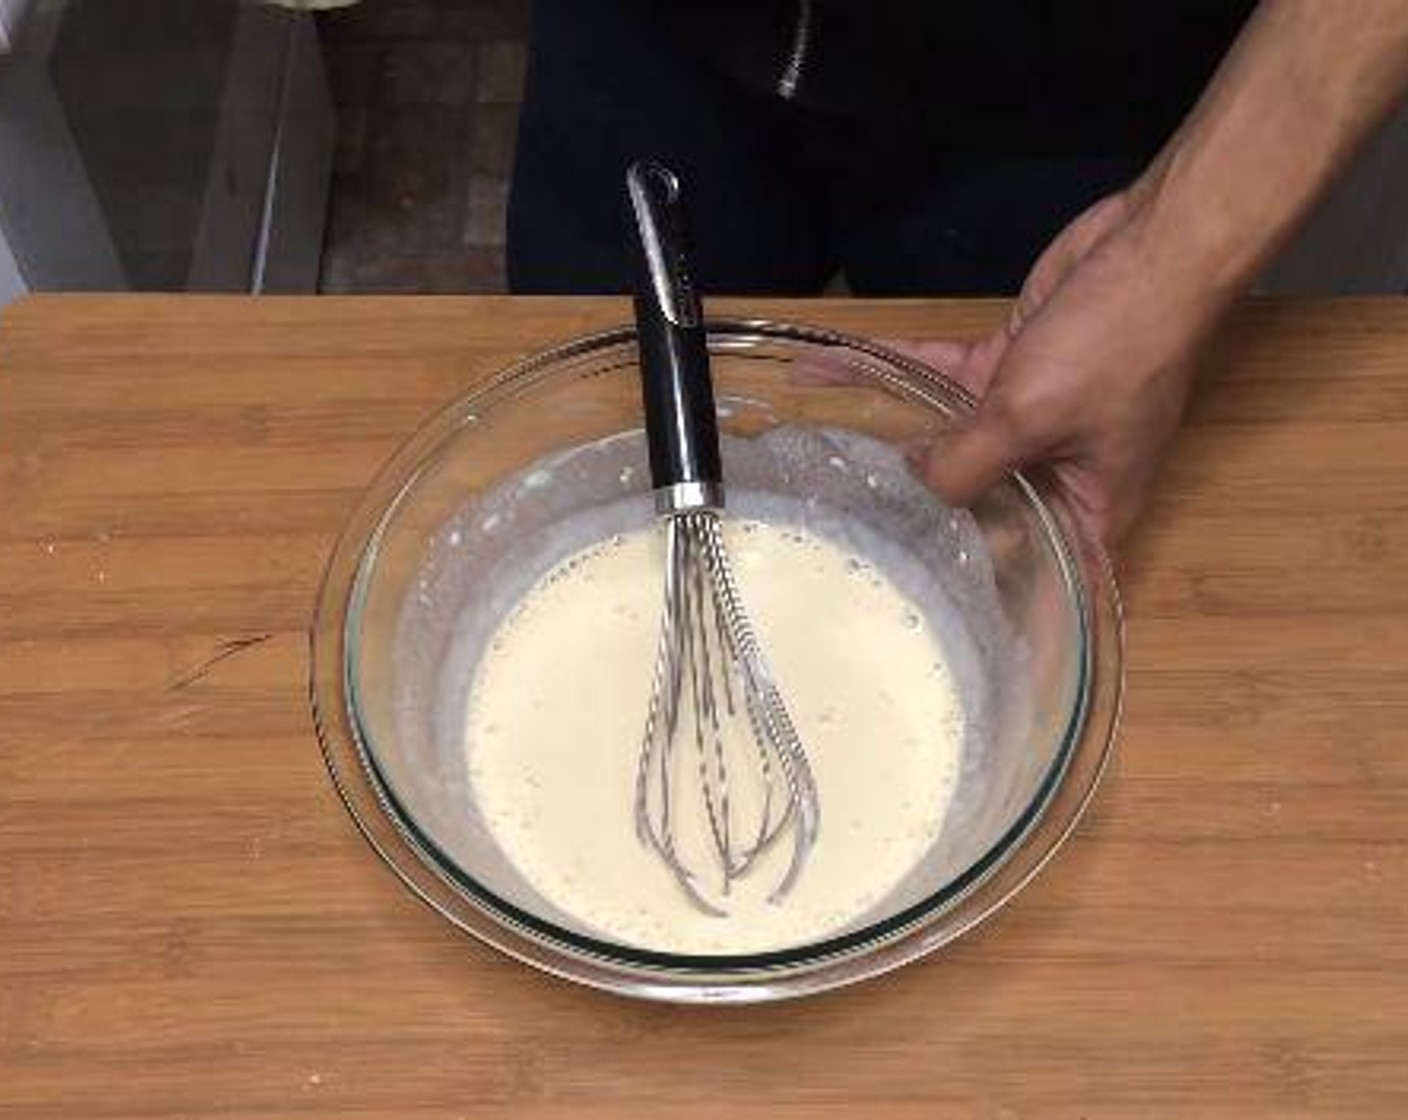 step 2 In another bowl or a jug, whisk the Milk (1 cup), Eggs (2), Sour Cream (2/3 cup),and Pure Vanilla Extract (2 Tbsp) until combined.